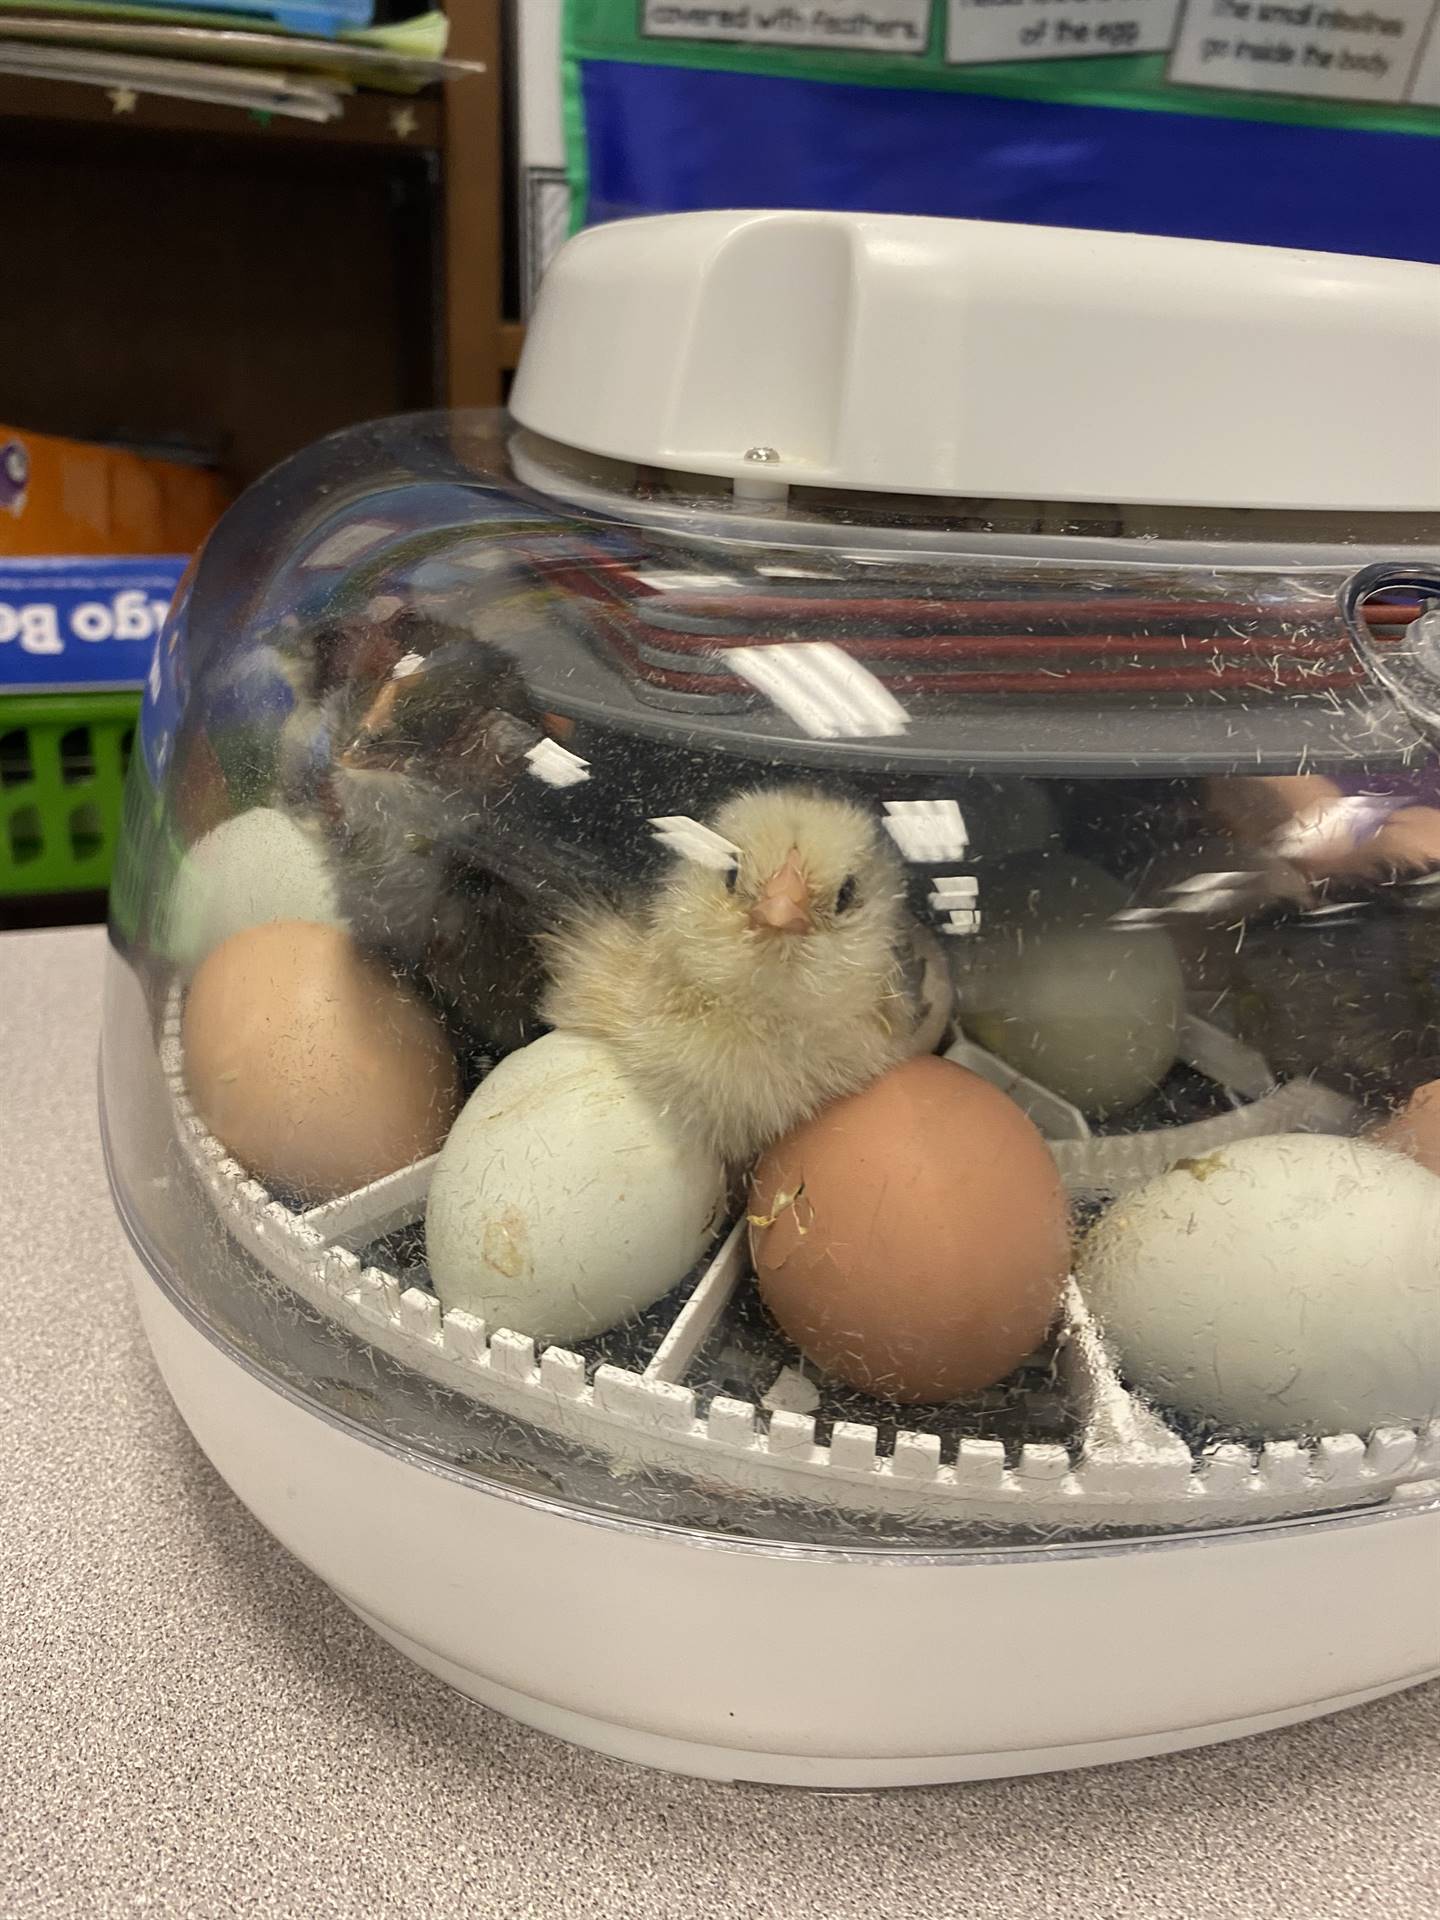 a chick standing next to eggs looks out 